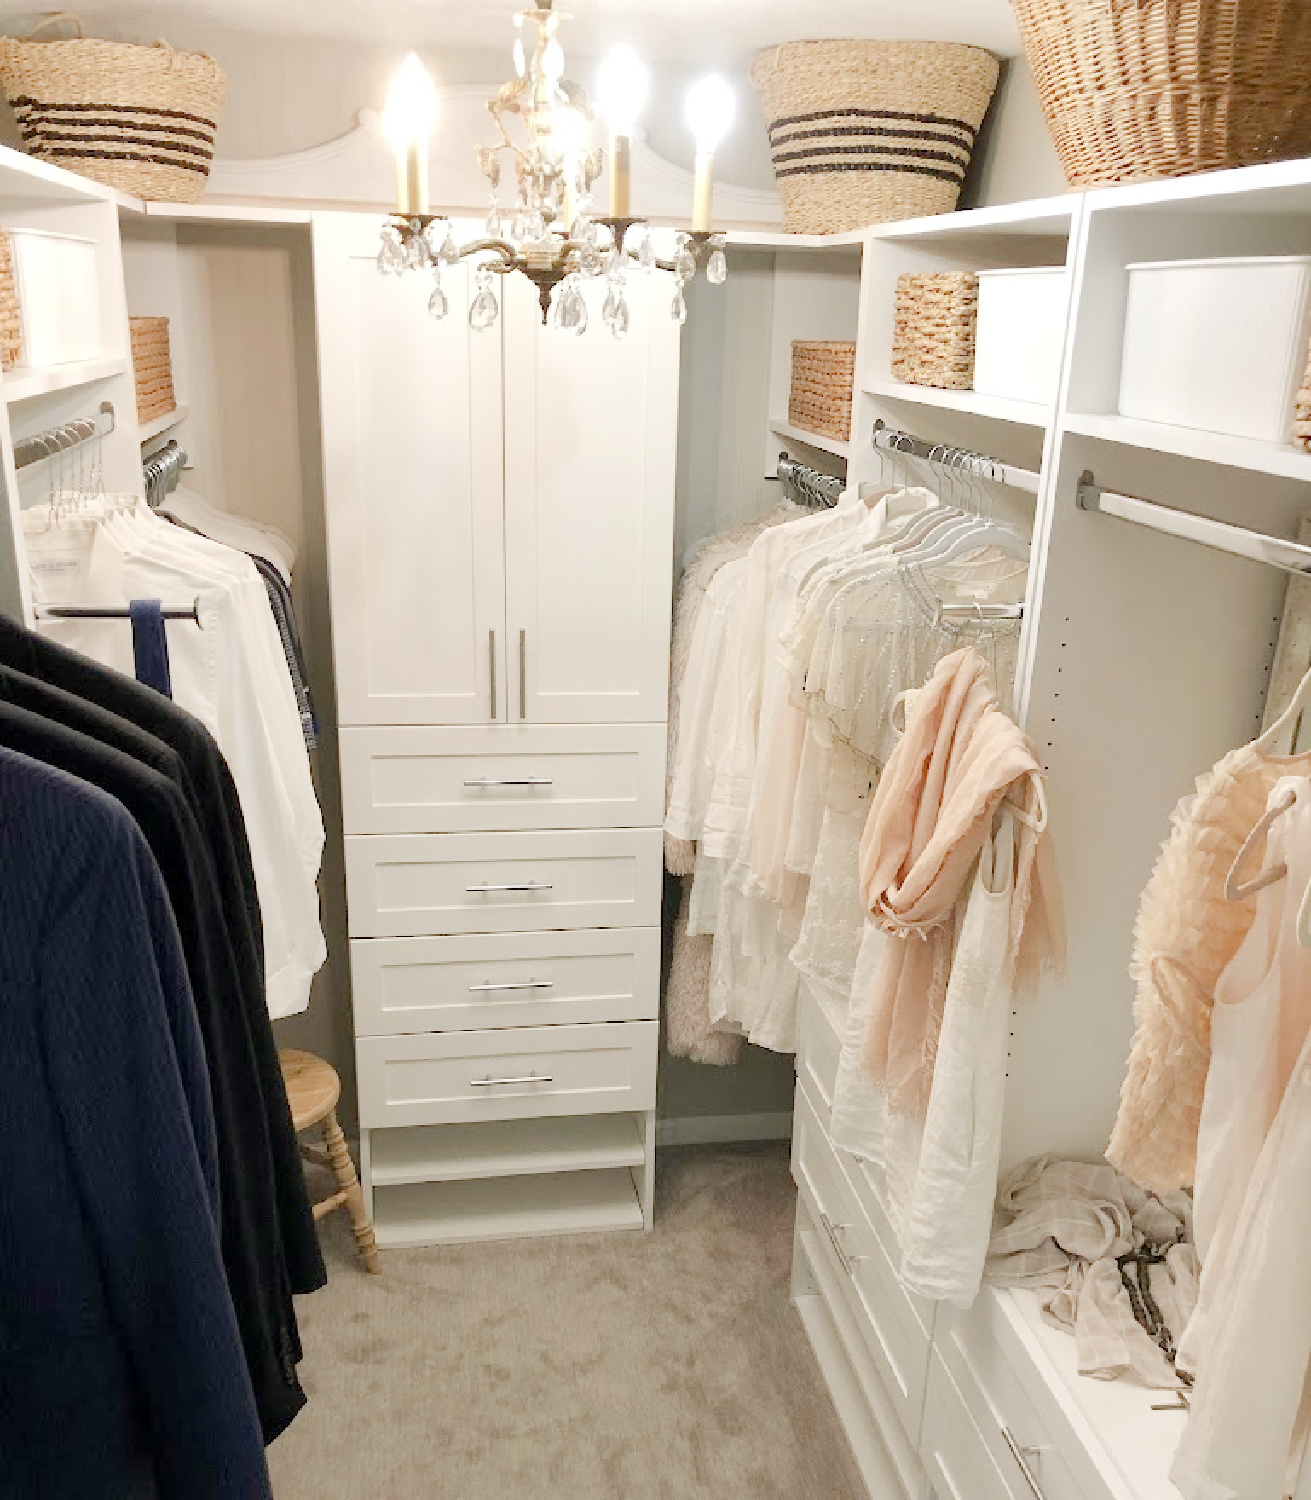 Hello Lovely's before & after walk-in closet shares a custom closet DIY with white Shaker style towers and drawers from Modular Closets. This his and hers closet makes the most of every inch. #closetupgrades #diycloset #customclosetideas #closetmakeover #closetmodules #diyclosetmakeover